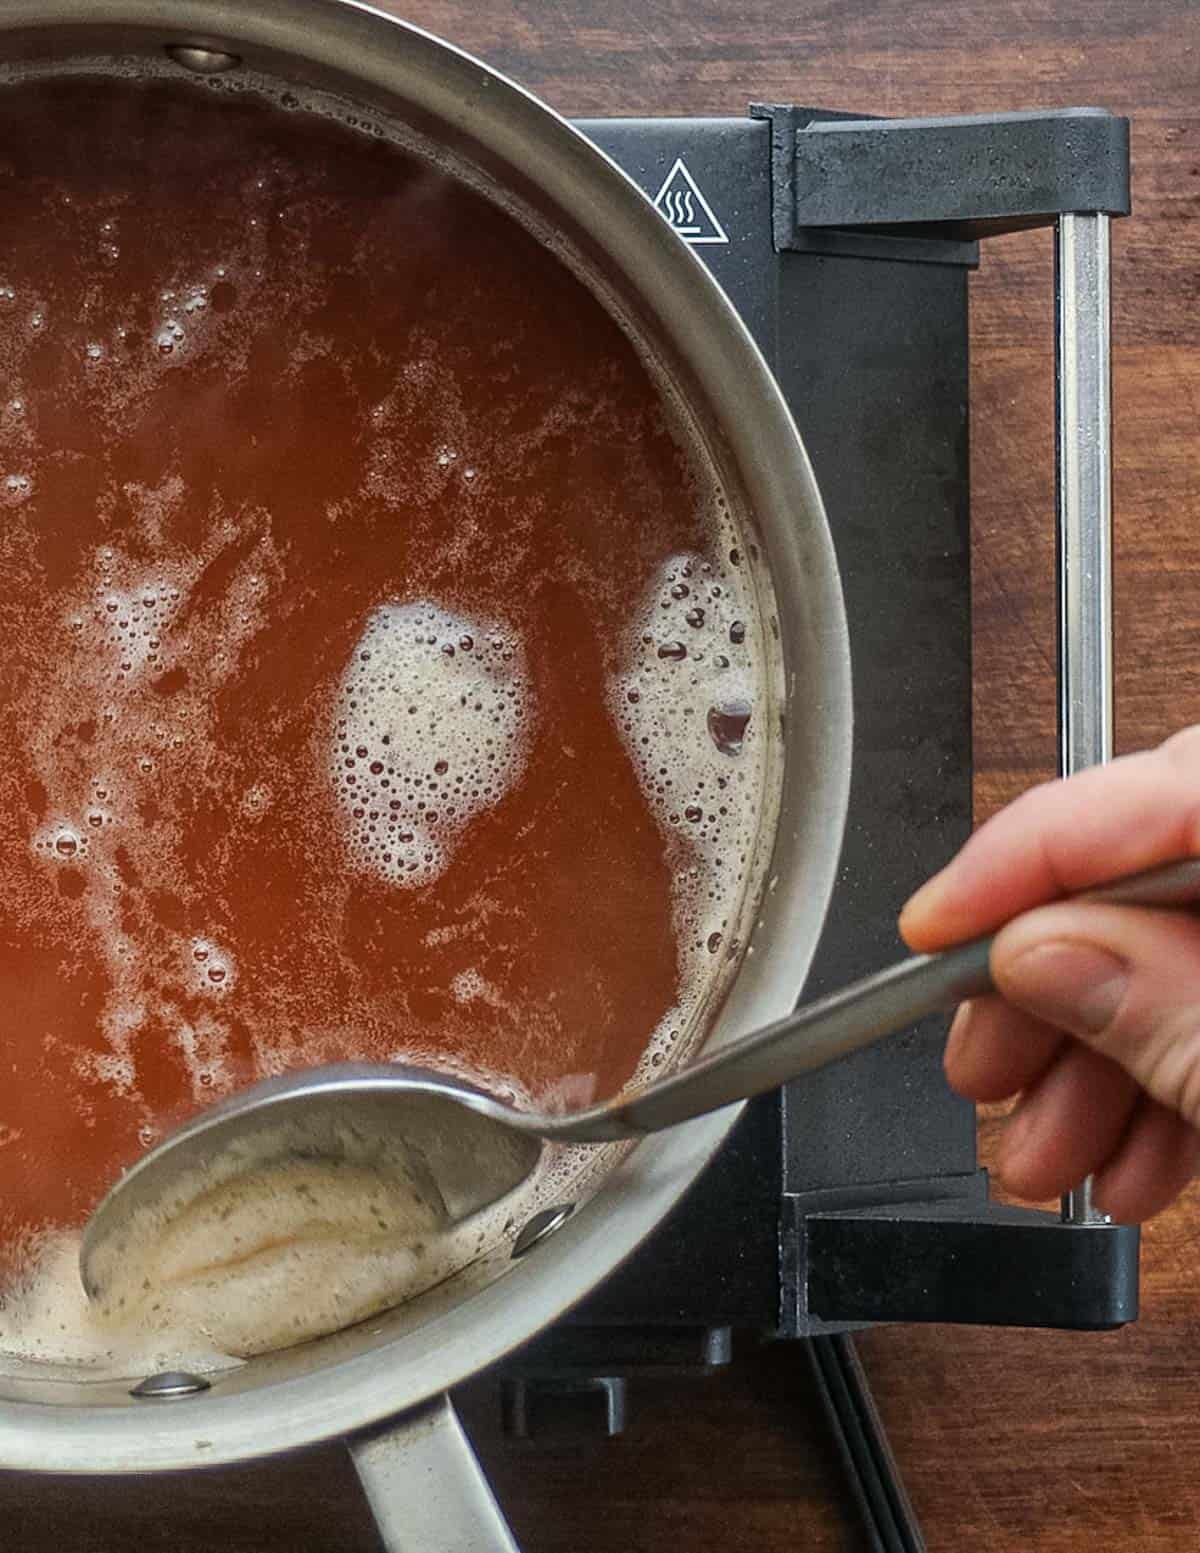 Skimming impurities from rosehip syrup as it cooks. 